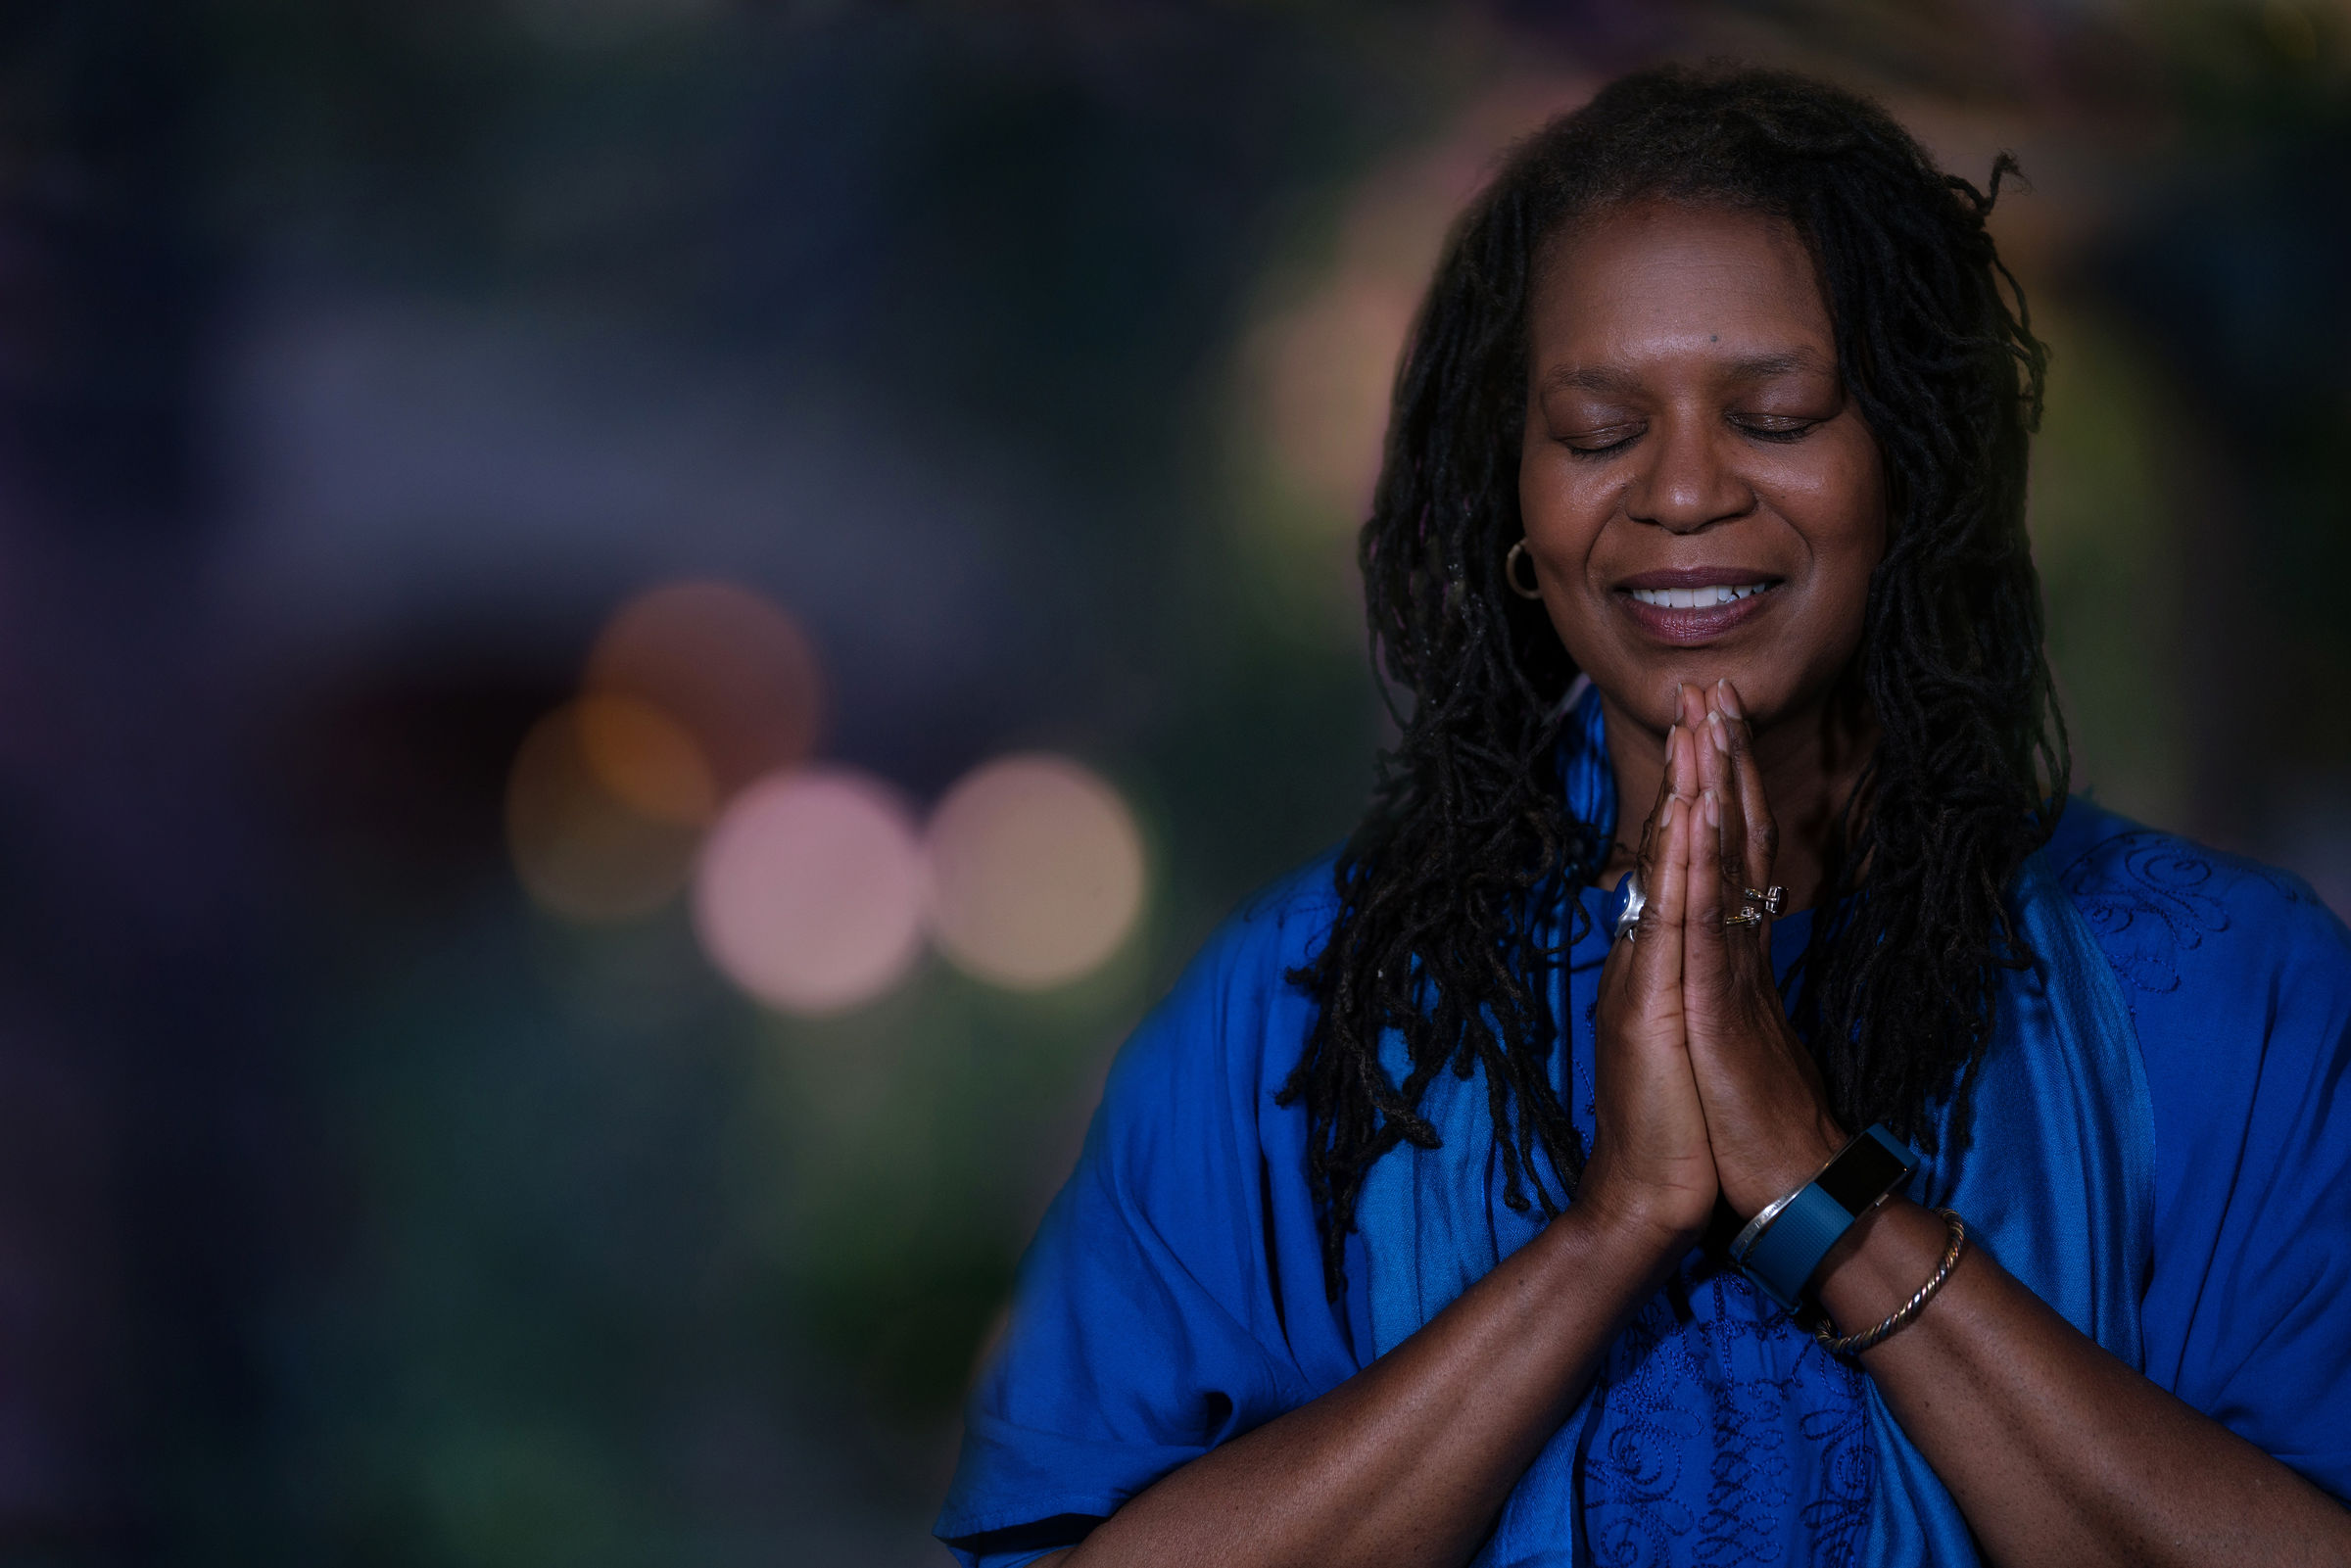 tips for quieting the mind for meditation and enjoying more peace in daily life